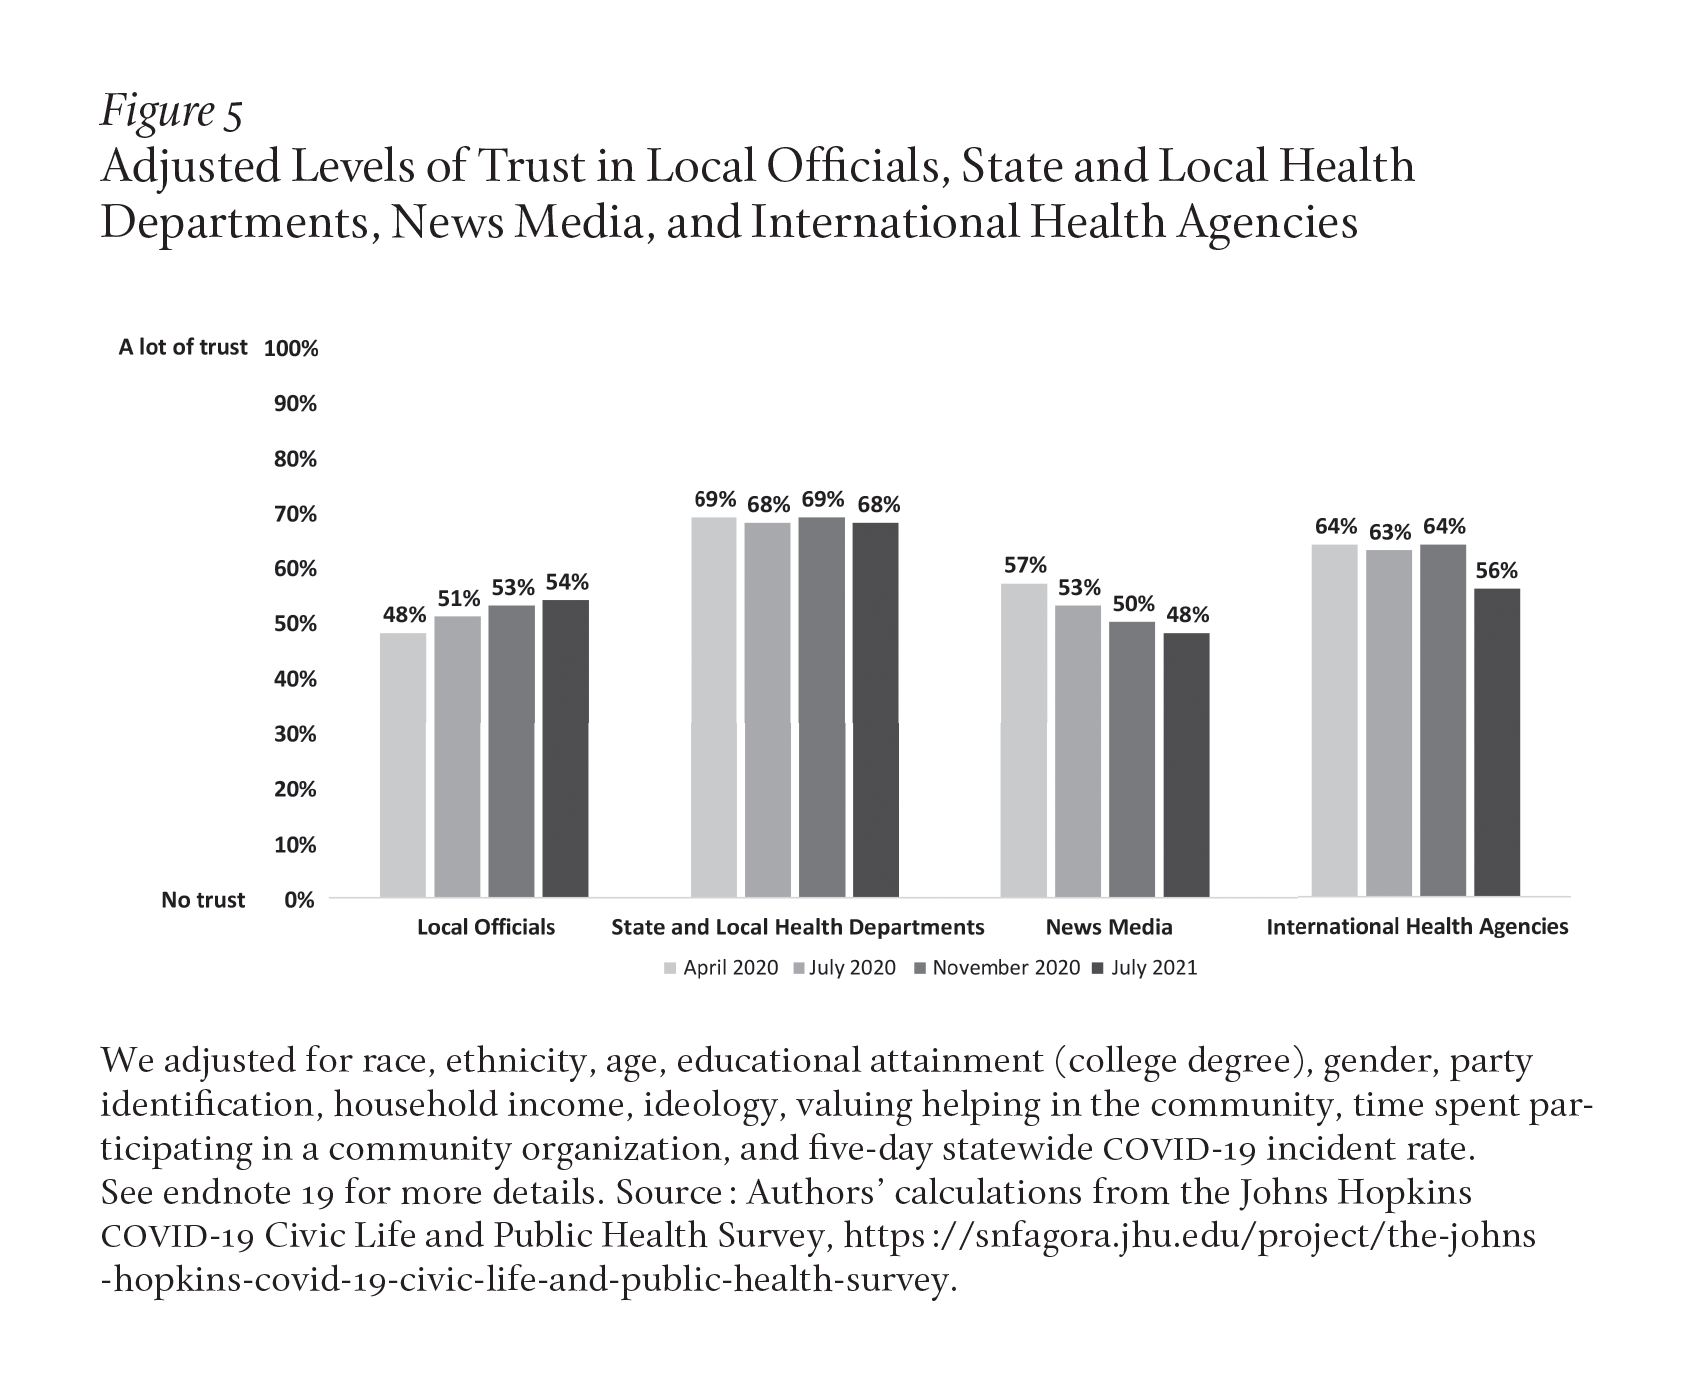 Image description: A bar chart shows rates of trust grew from 48% to 54% for local officials, and remained steady at 68-69% for state and local health departments throughout the authors' study, compared with diminished rates of trust in news media (57% to 48%) and international health agencies (64% to 56%). Caption: The authors adjusted the data for various identity demographics. See endnote 19 for methodology details. Source: The Johns Hopkins COVID-19 Civic Life and Public Health Survey.